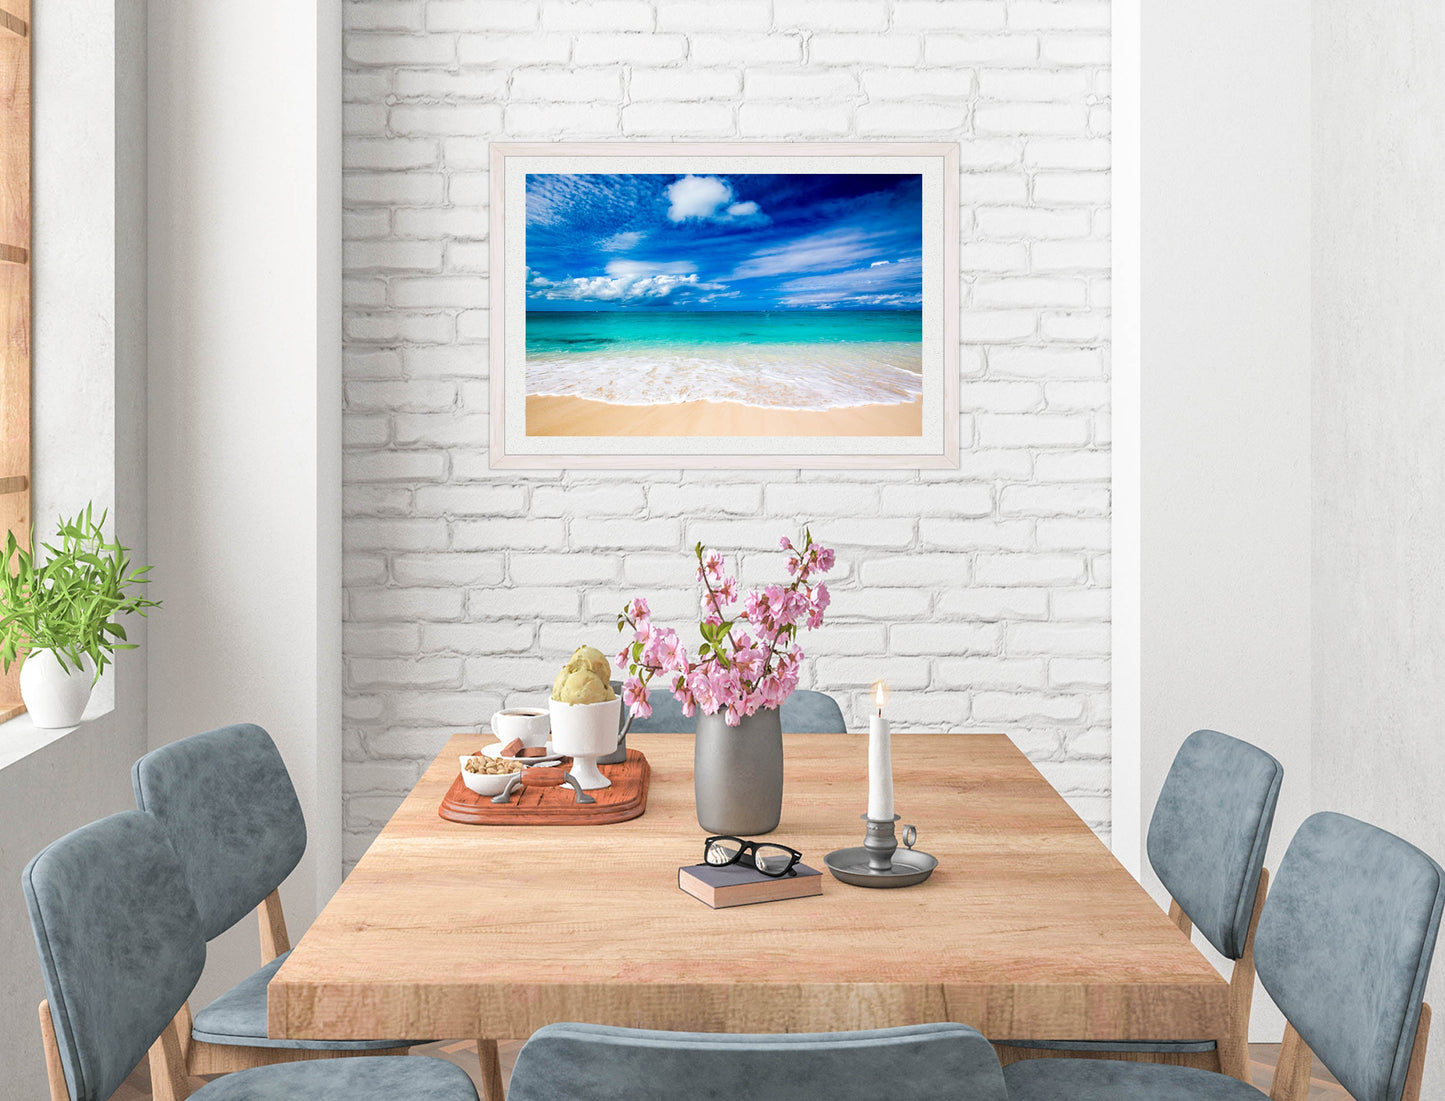 White Sand Beach - Evening on the Pond - Framed Photo - White on Dining Room Room Wall